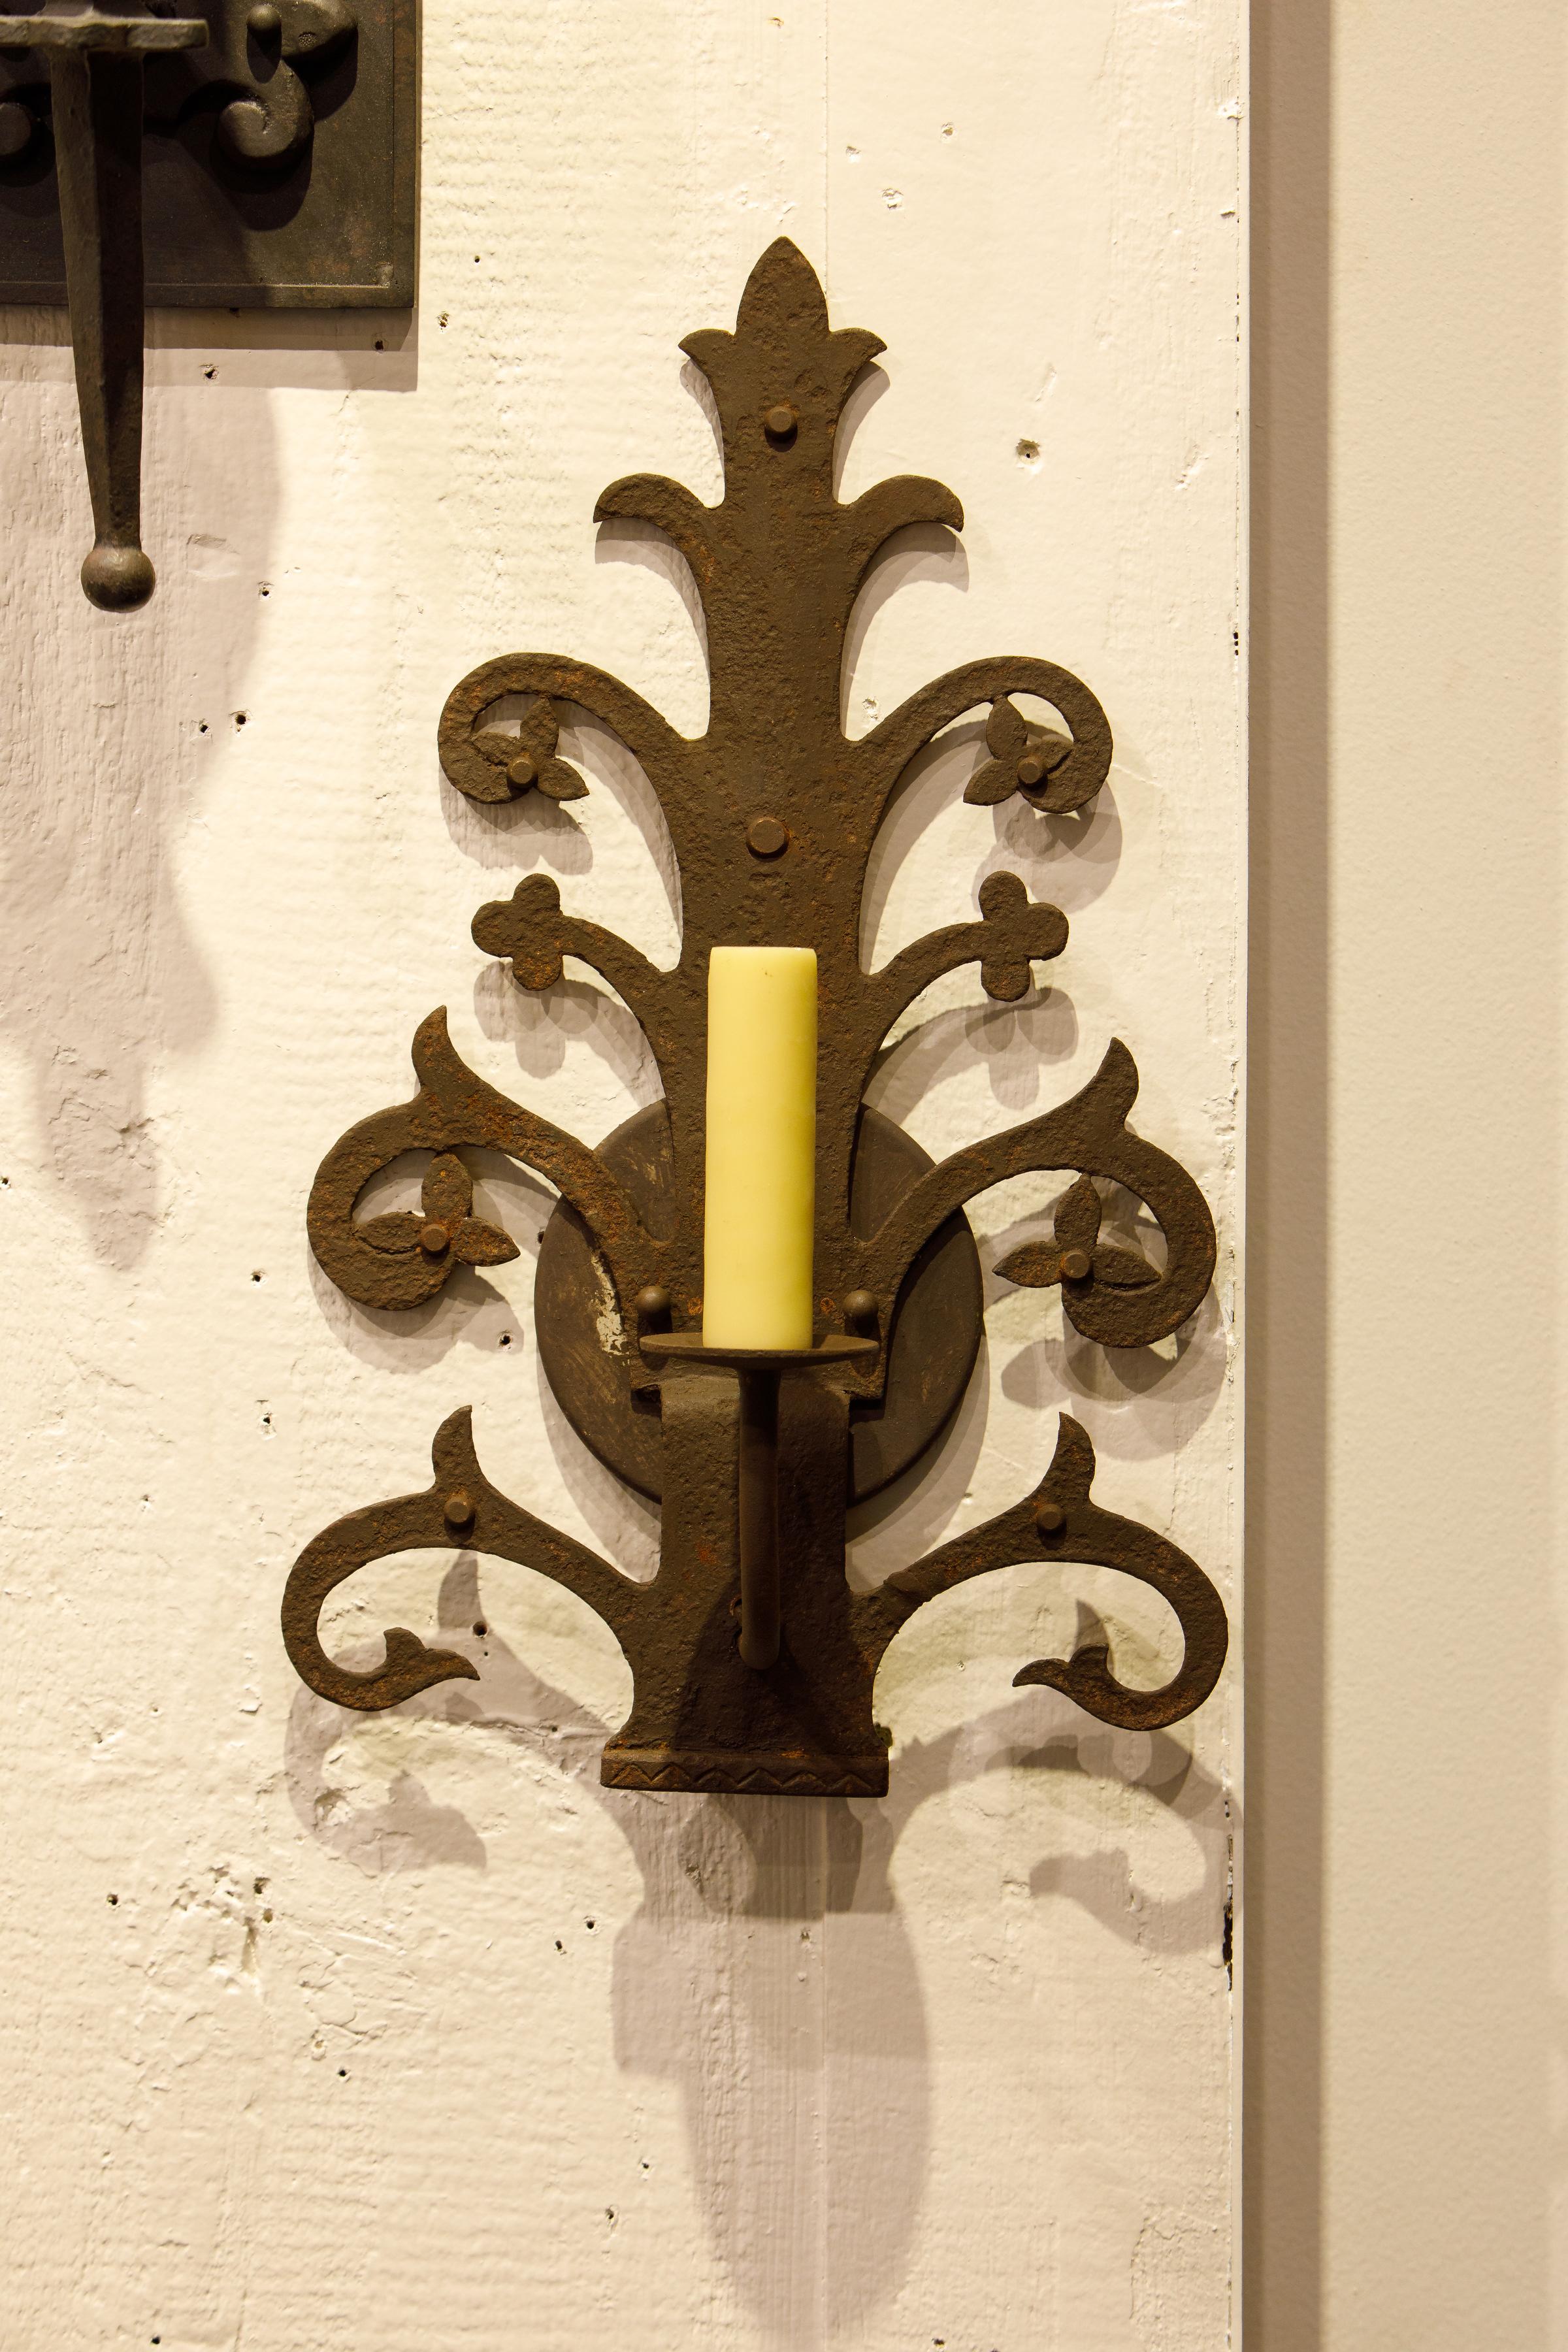 We have a pair of these sconces available. They are hard to classify stylistically because they have elements of both French Rustic and Spanish Colonial styles. Beautifully forged iron in and interesting flower-like motif. Re-wired for US with all